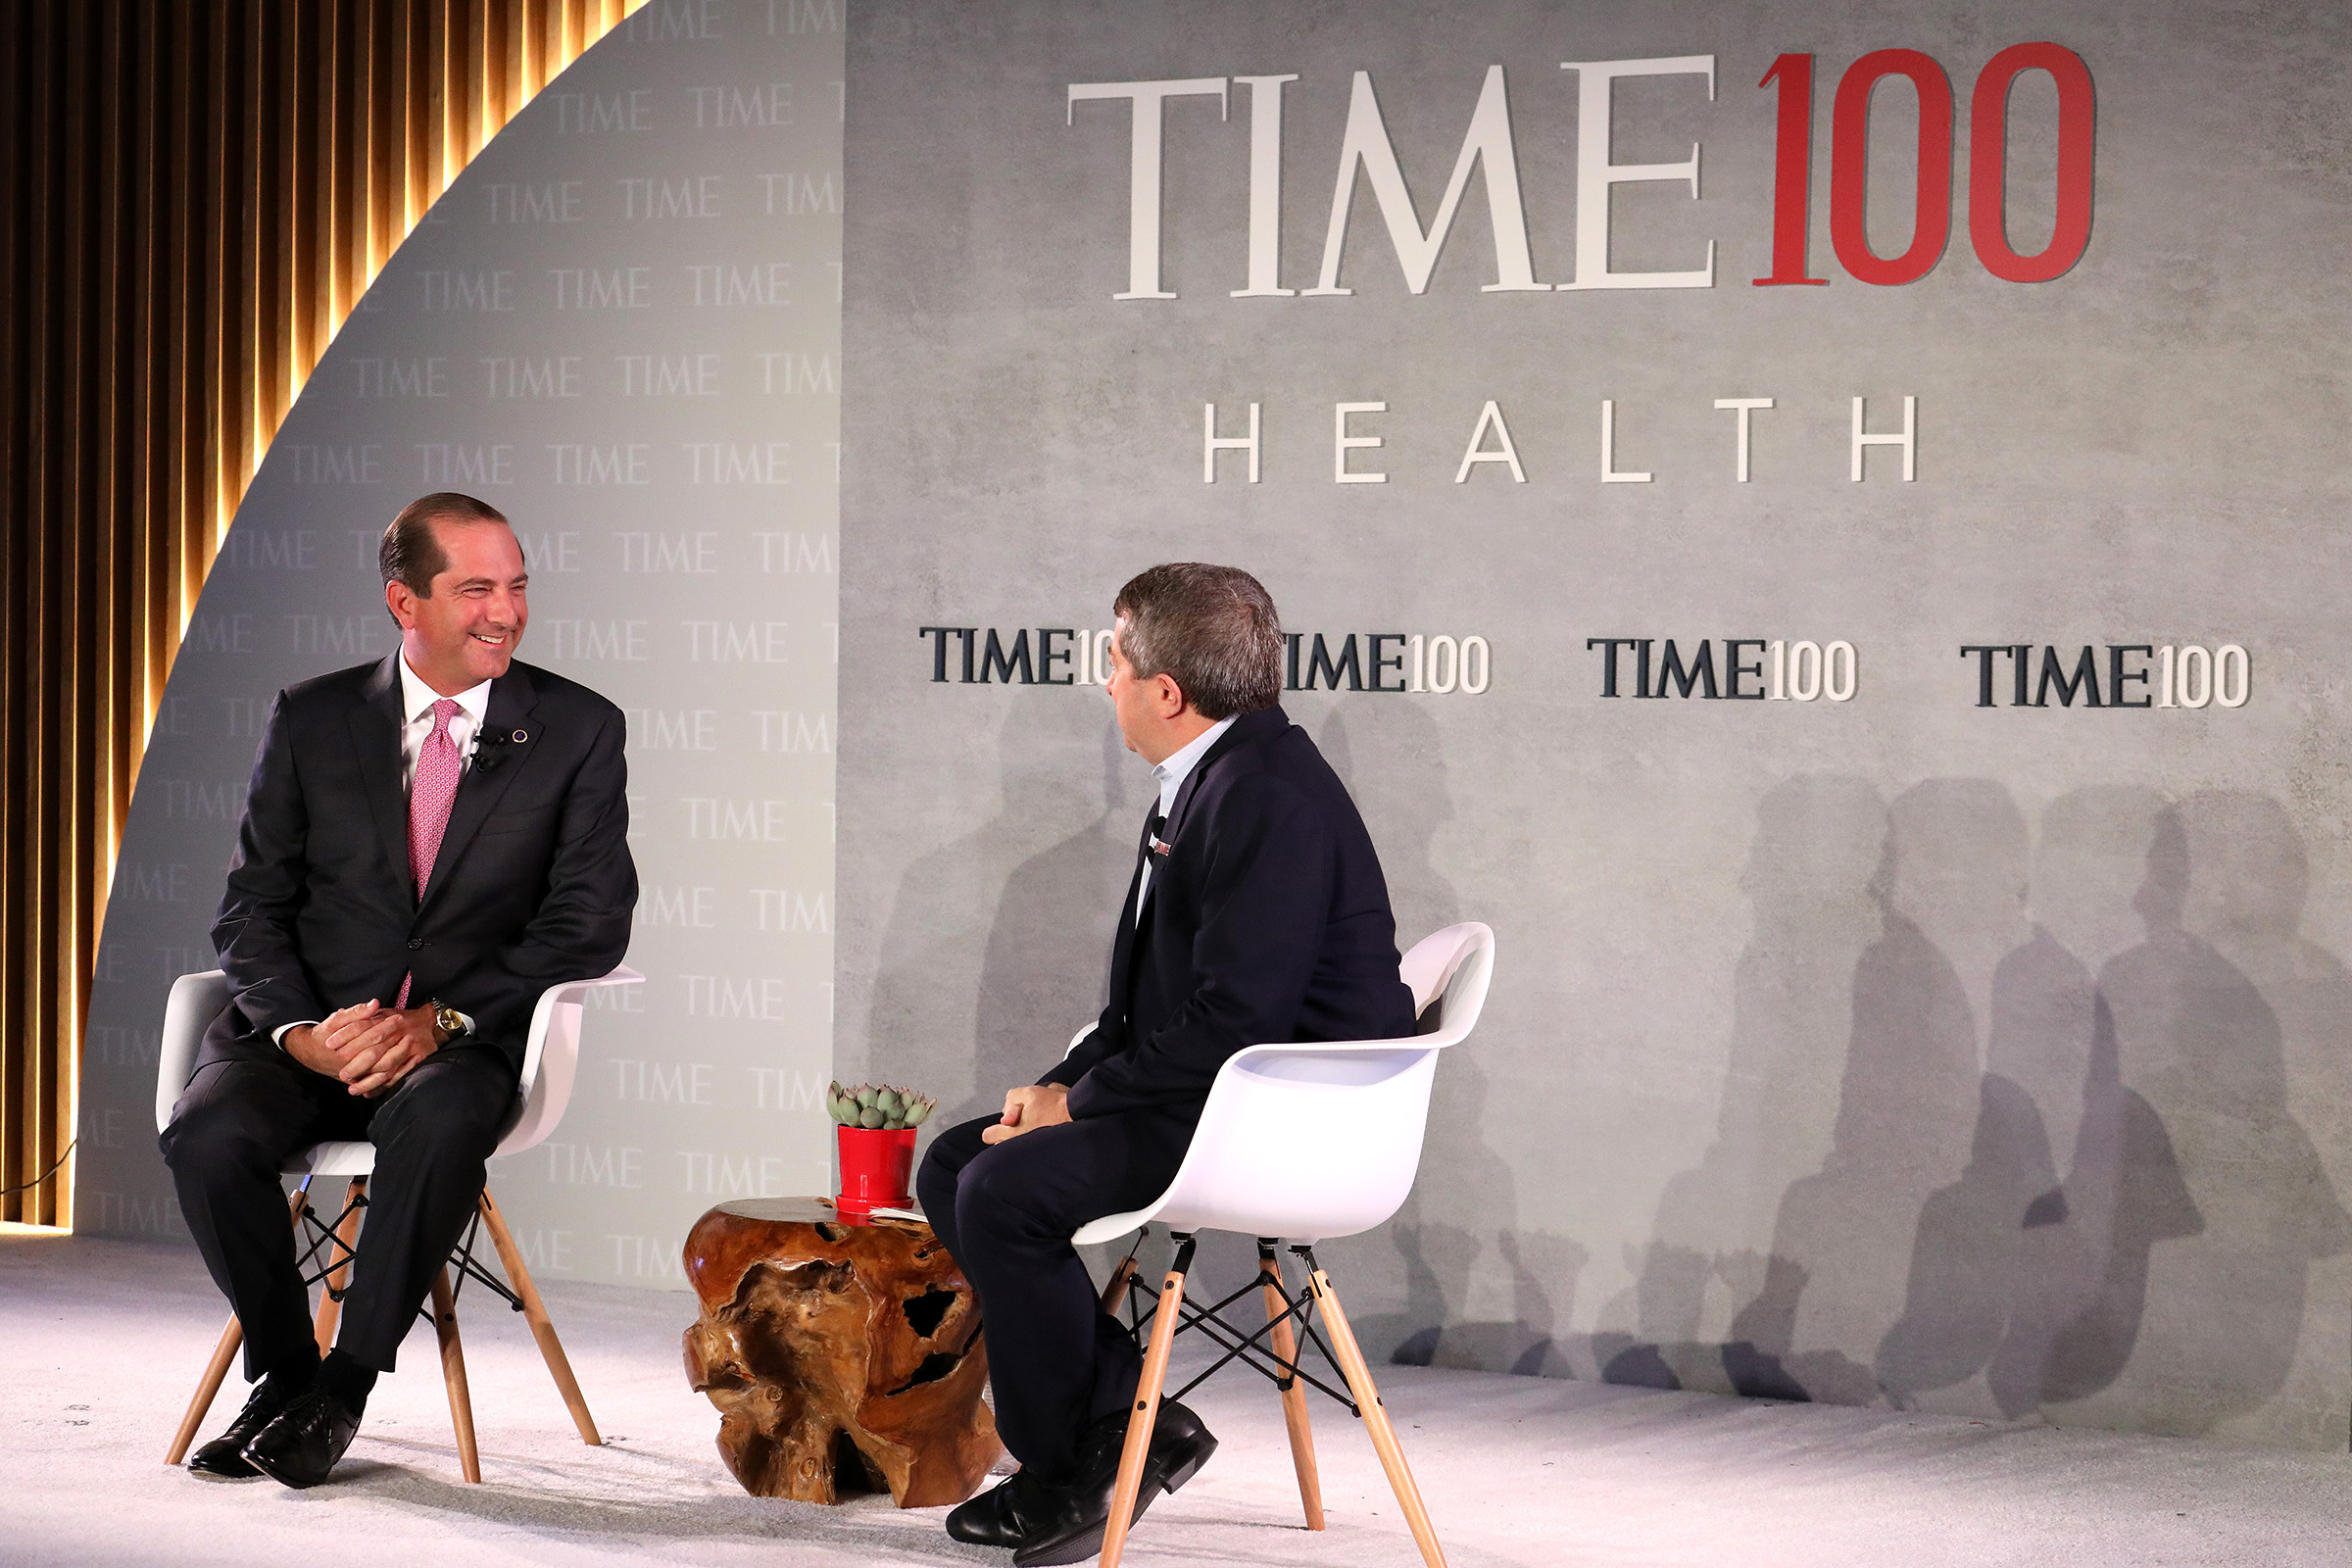 United States Secretary of Health and Human Services, Alex Azar (L), speaks with Editor-in-Chief &amp; CEO at TIME, Edward Felsenthal, onstage during the TIME 100 Health Summit at Pier 17 on October 17, 2019 in New York City. (Brian Ach—Getty Images for TIME 100 Health)